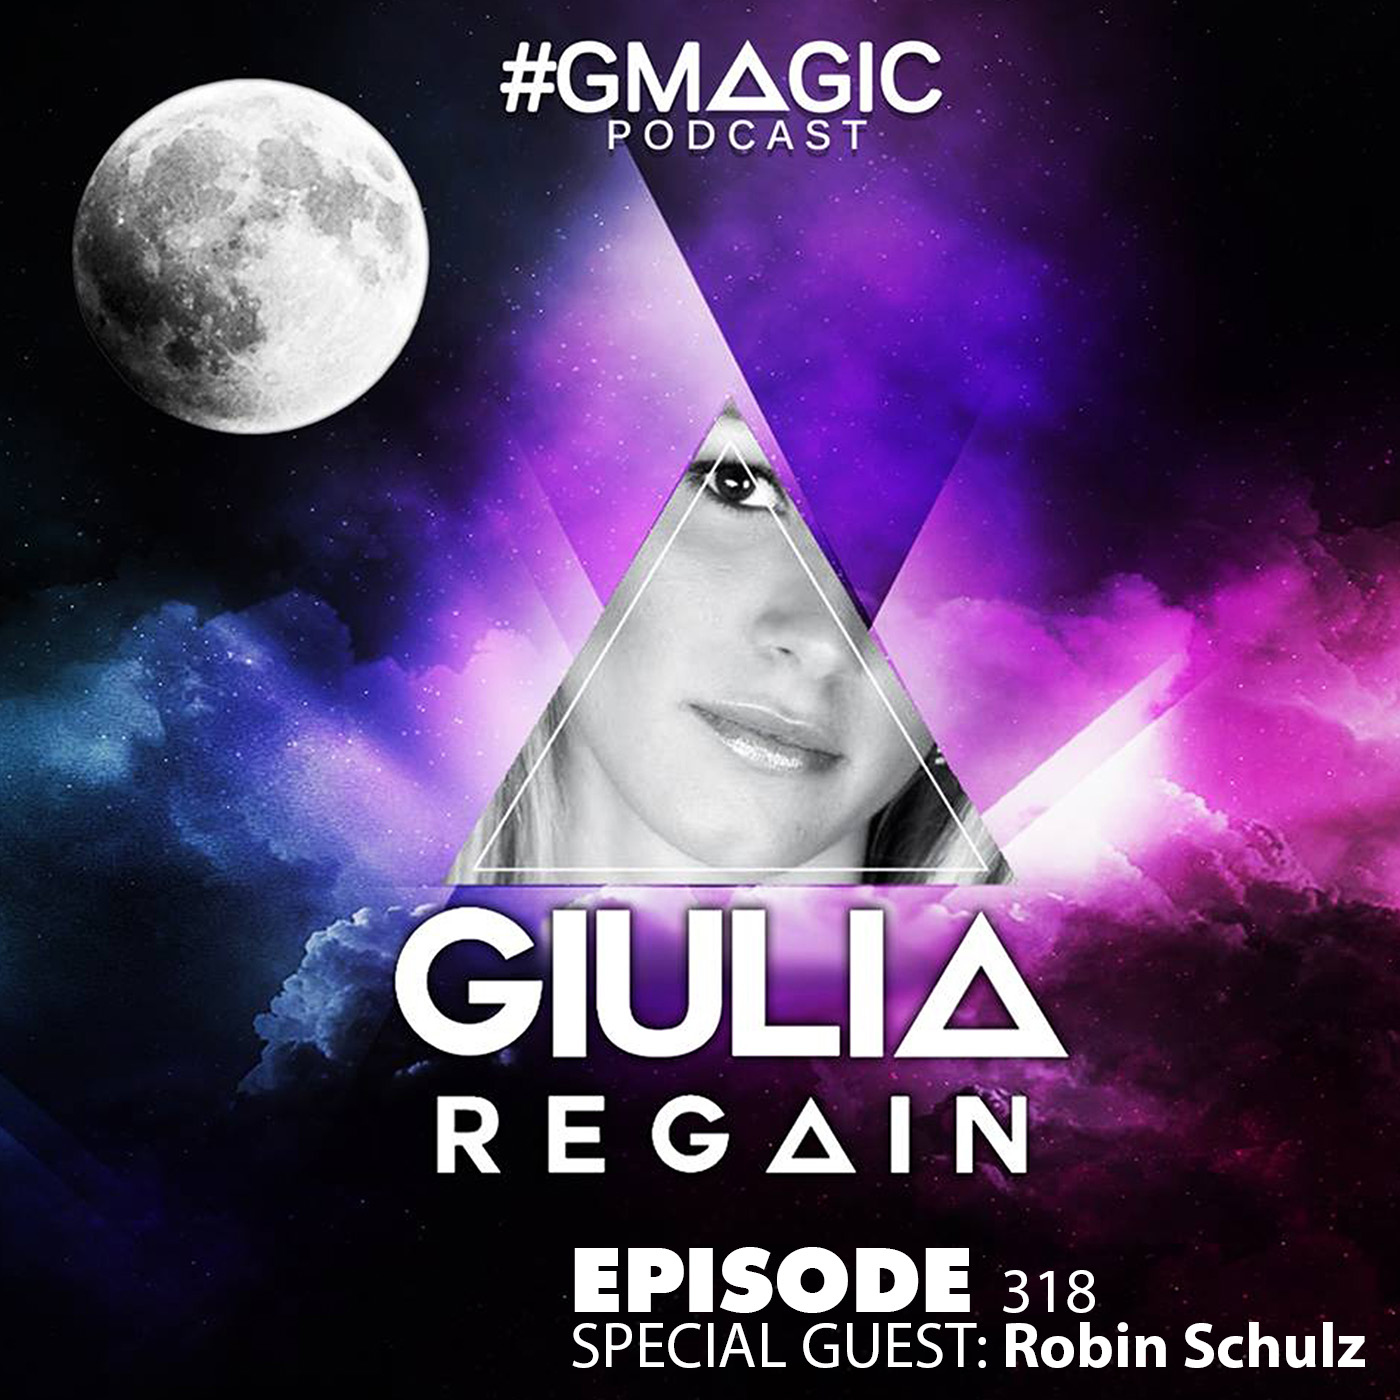 #Gmagic Podcast 318 - Special Guest: Robin Schulz